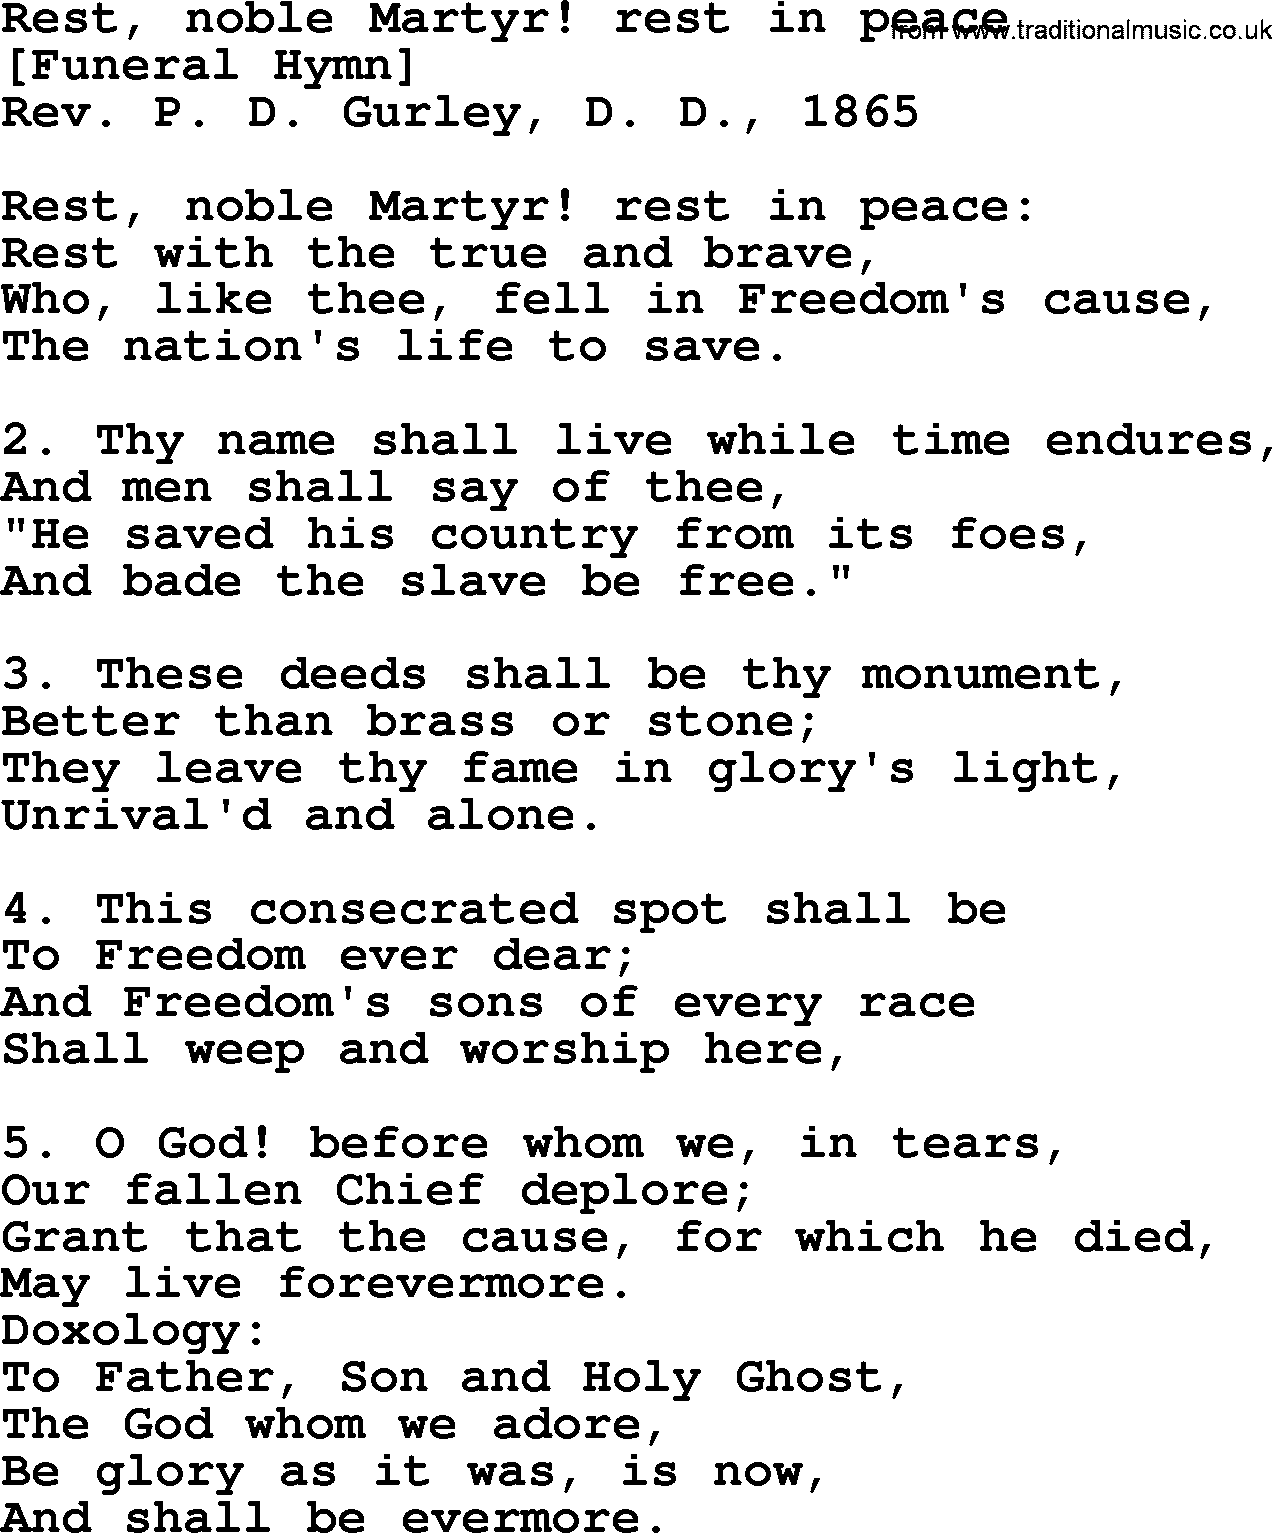 Old American Song: Rest, Noble Martyr! Rest In Peace, lyrics